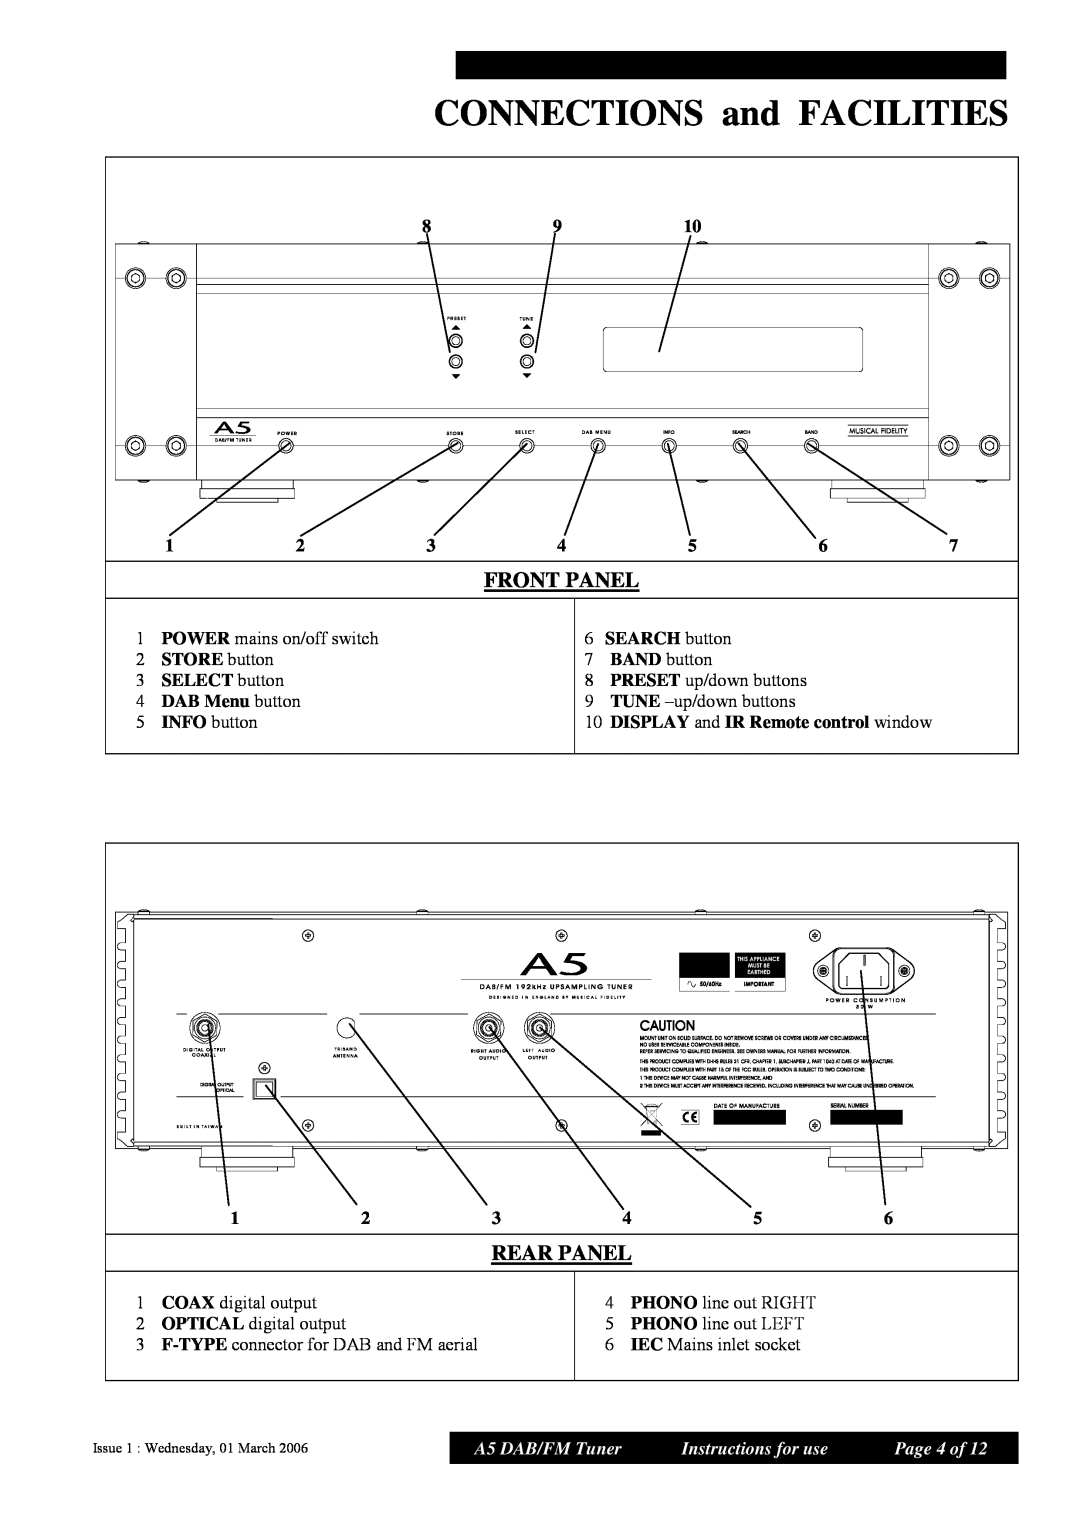 Musical Fidelity CONNECTIONS and FACILITIES, Front Panel, Rear Panel, A5 DAB/FM Tuner, Instructions for use, Page 4 of 